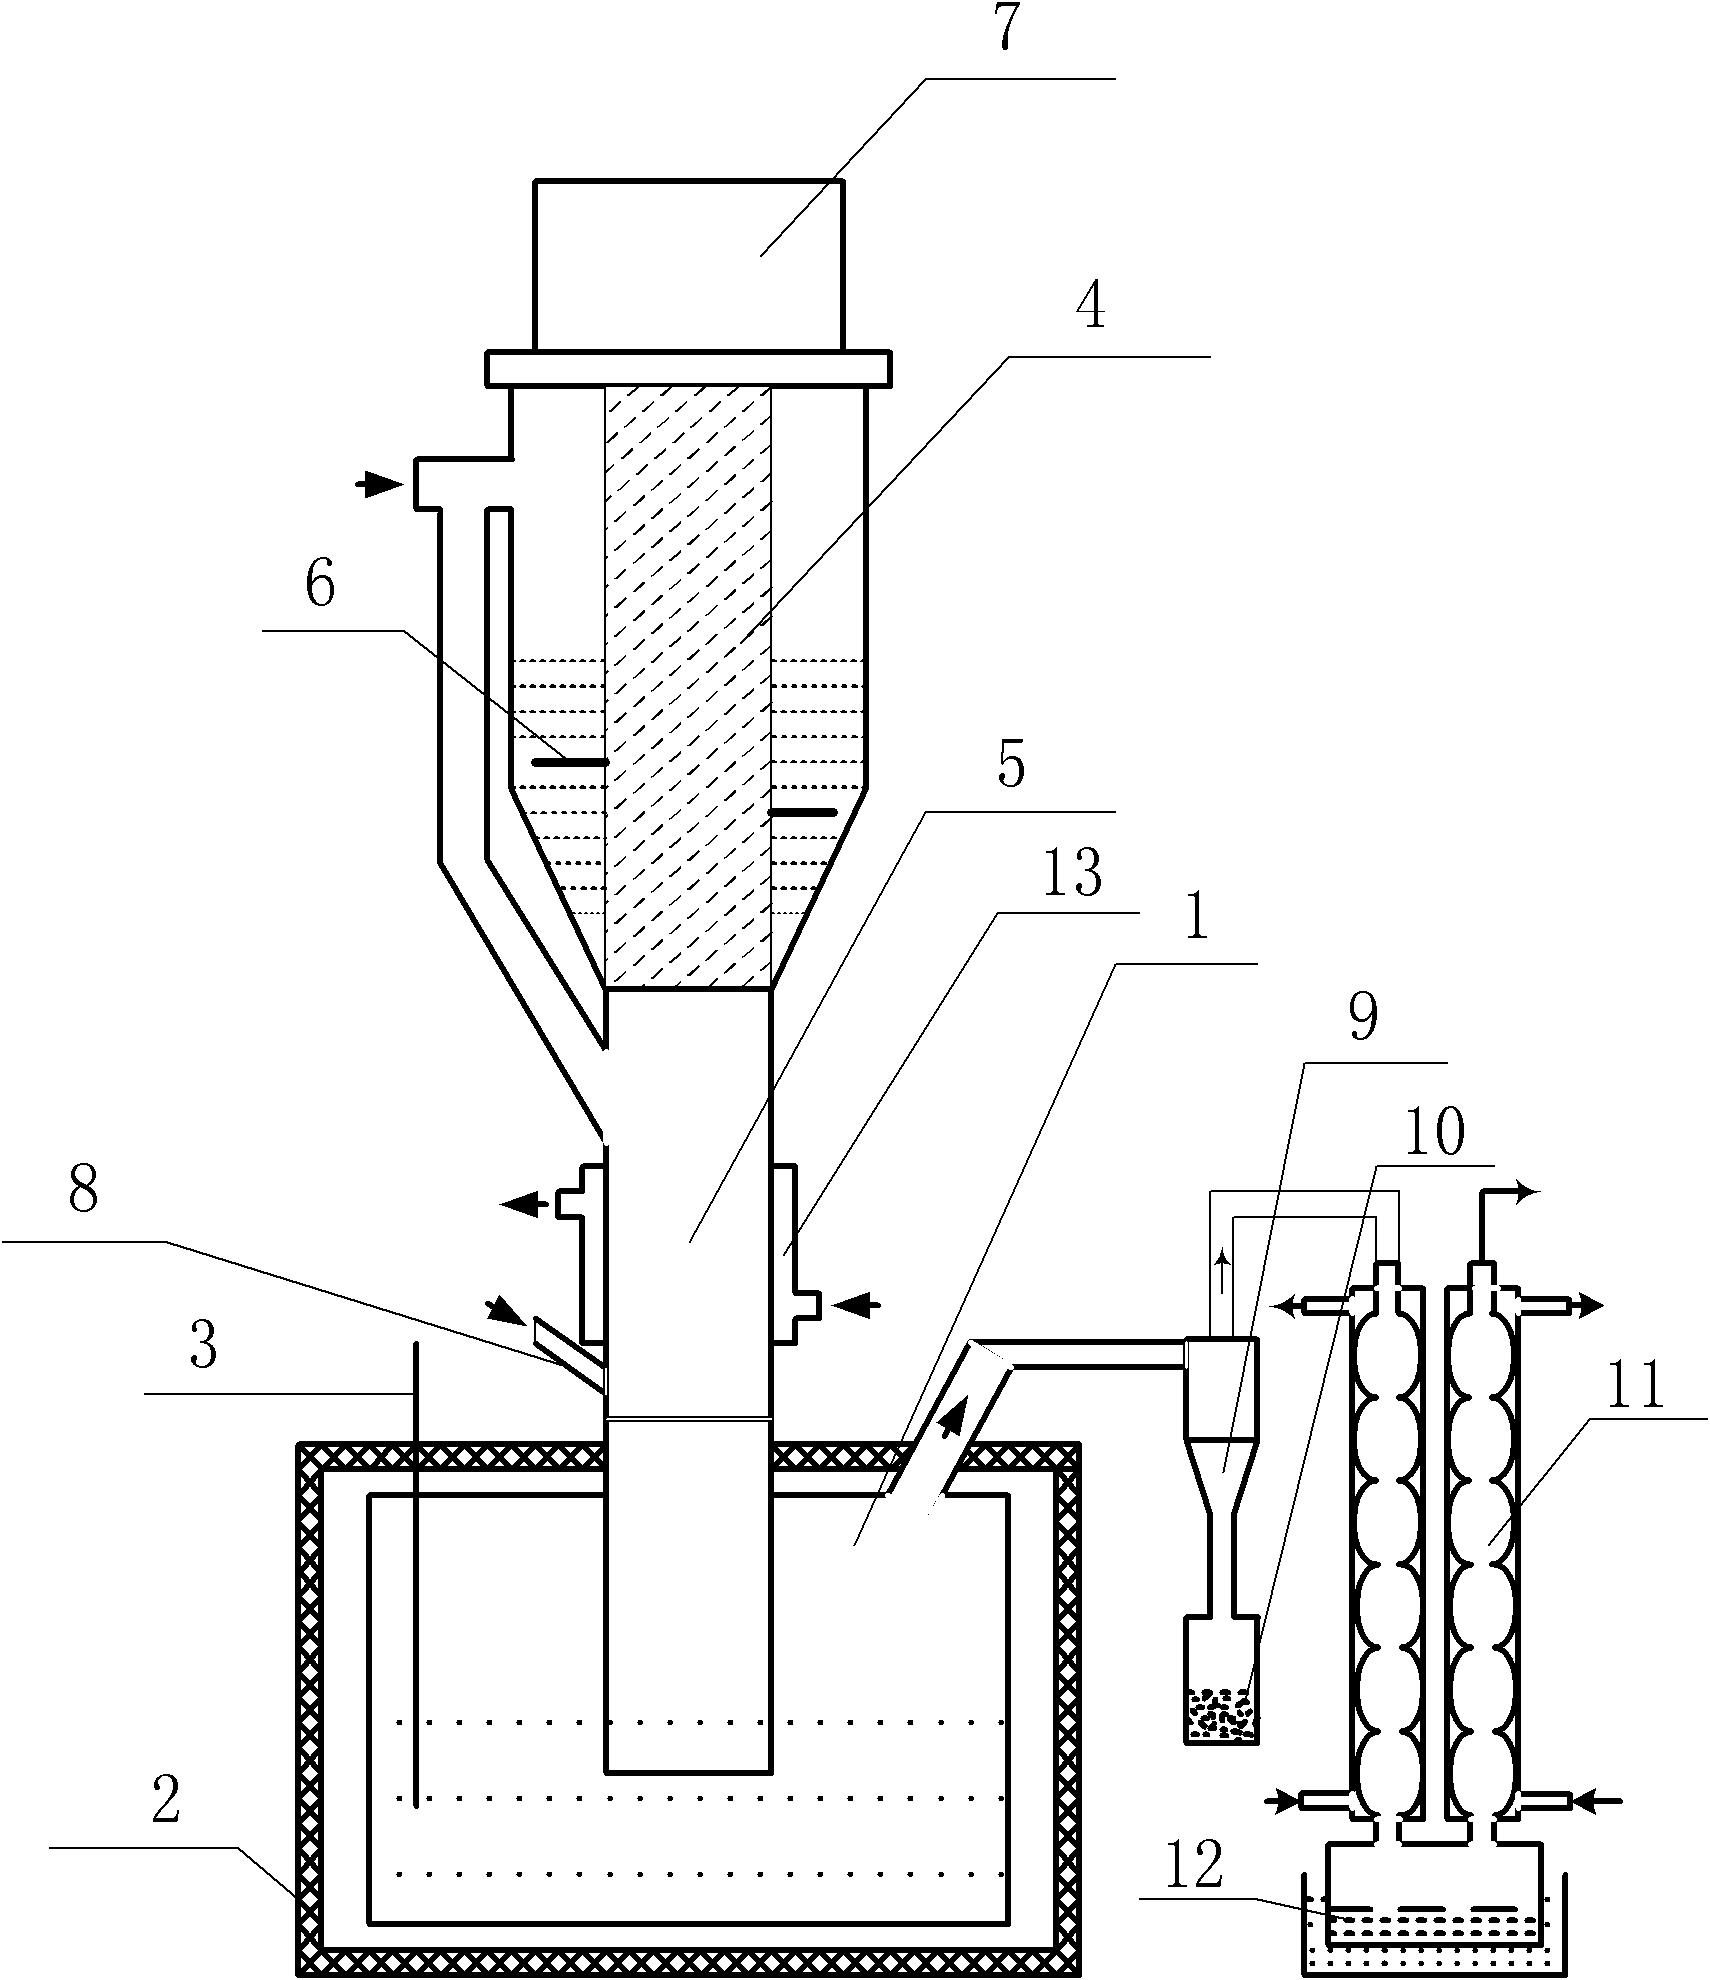 Process for co-producing bio-oil and biological carbon by utilizing crop straws and special device